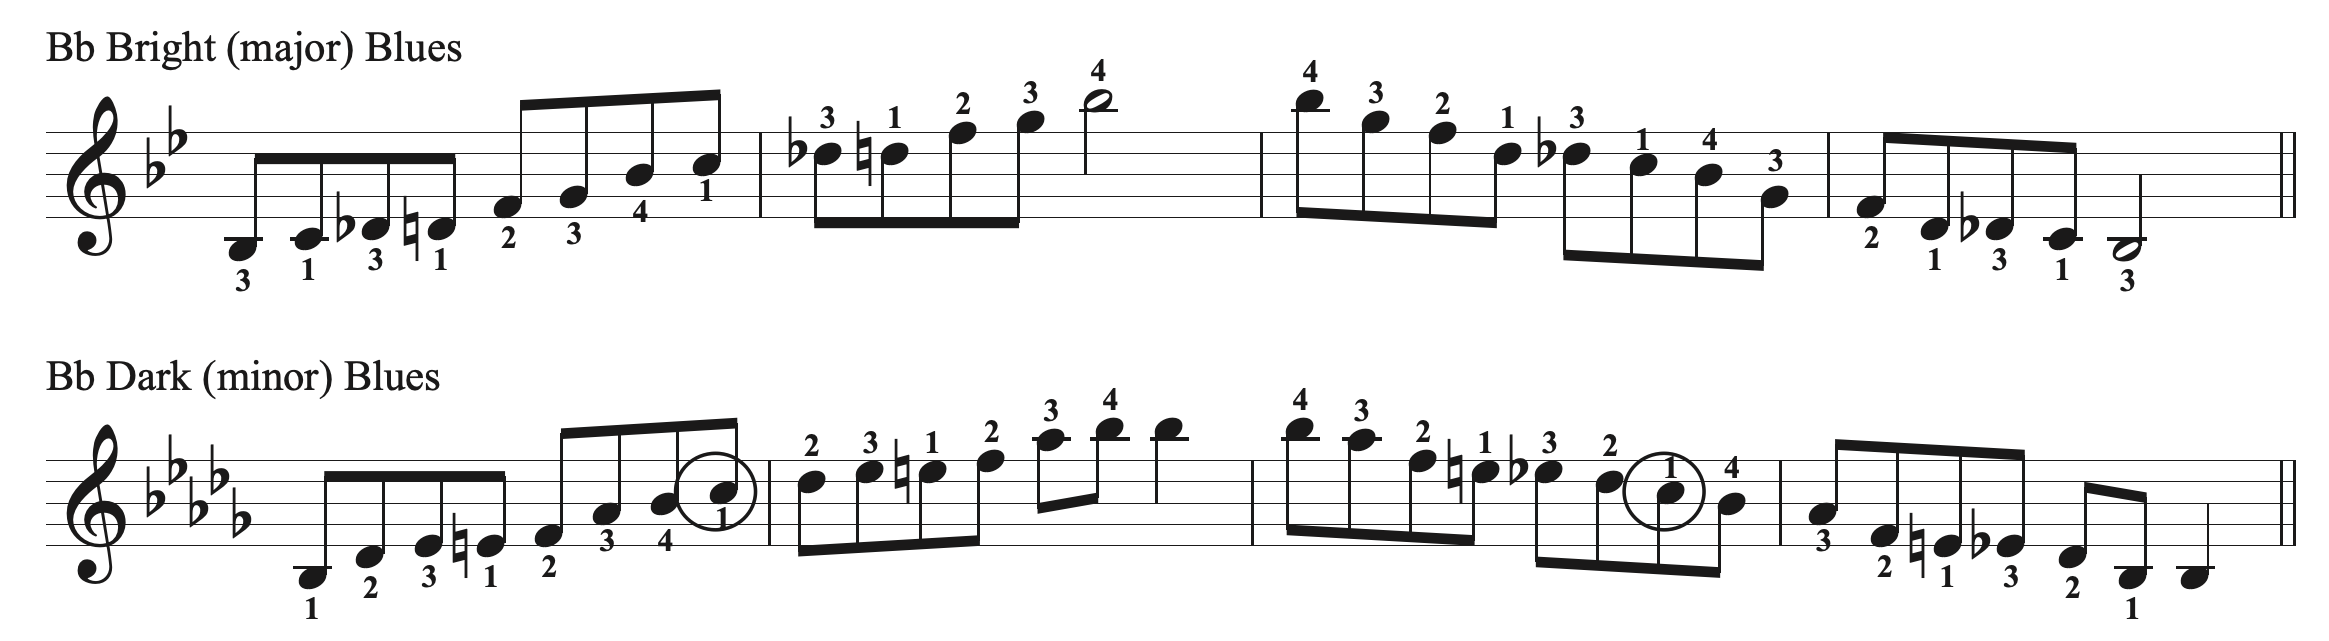 Scales to master for the Bb jazz blues progression? When I look up